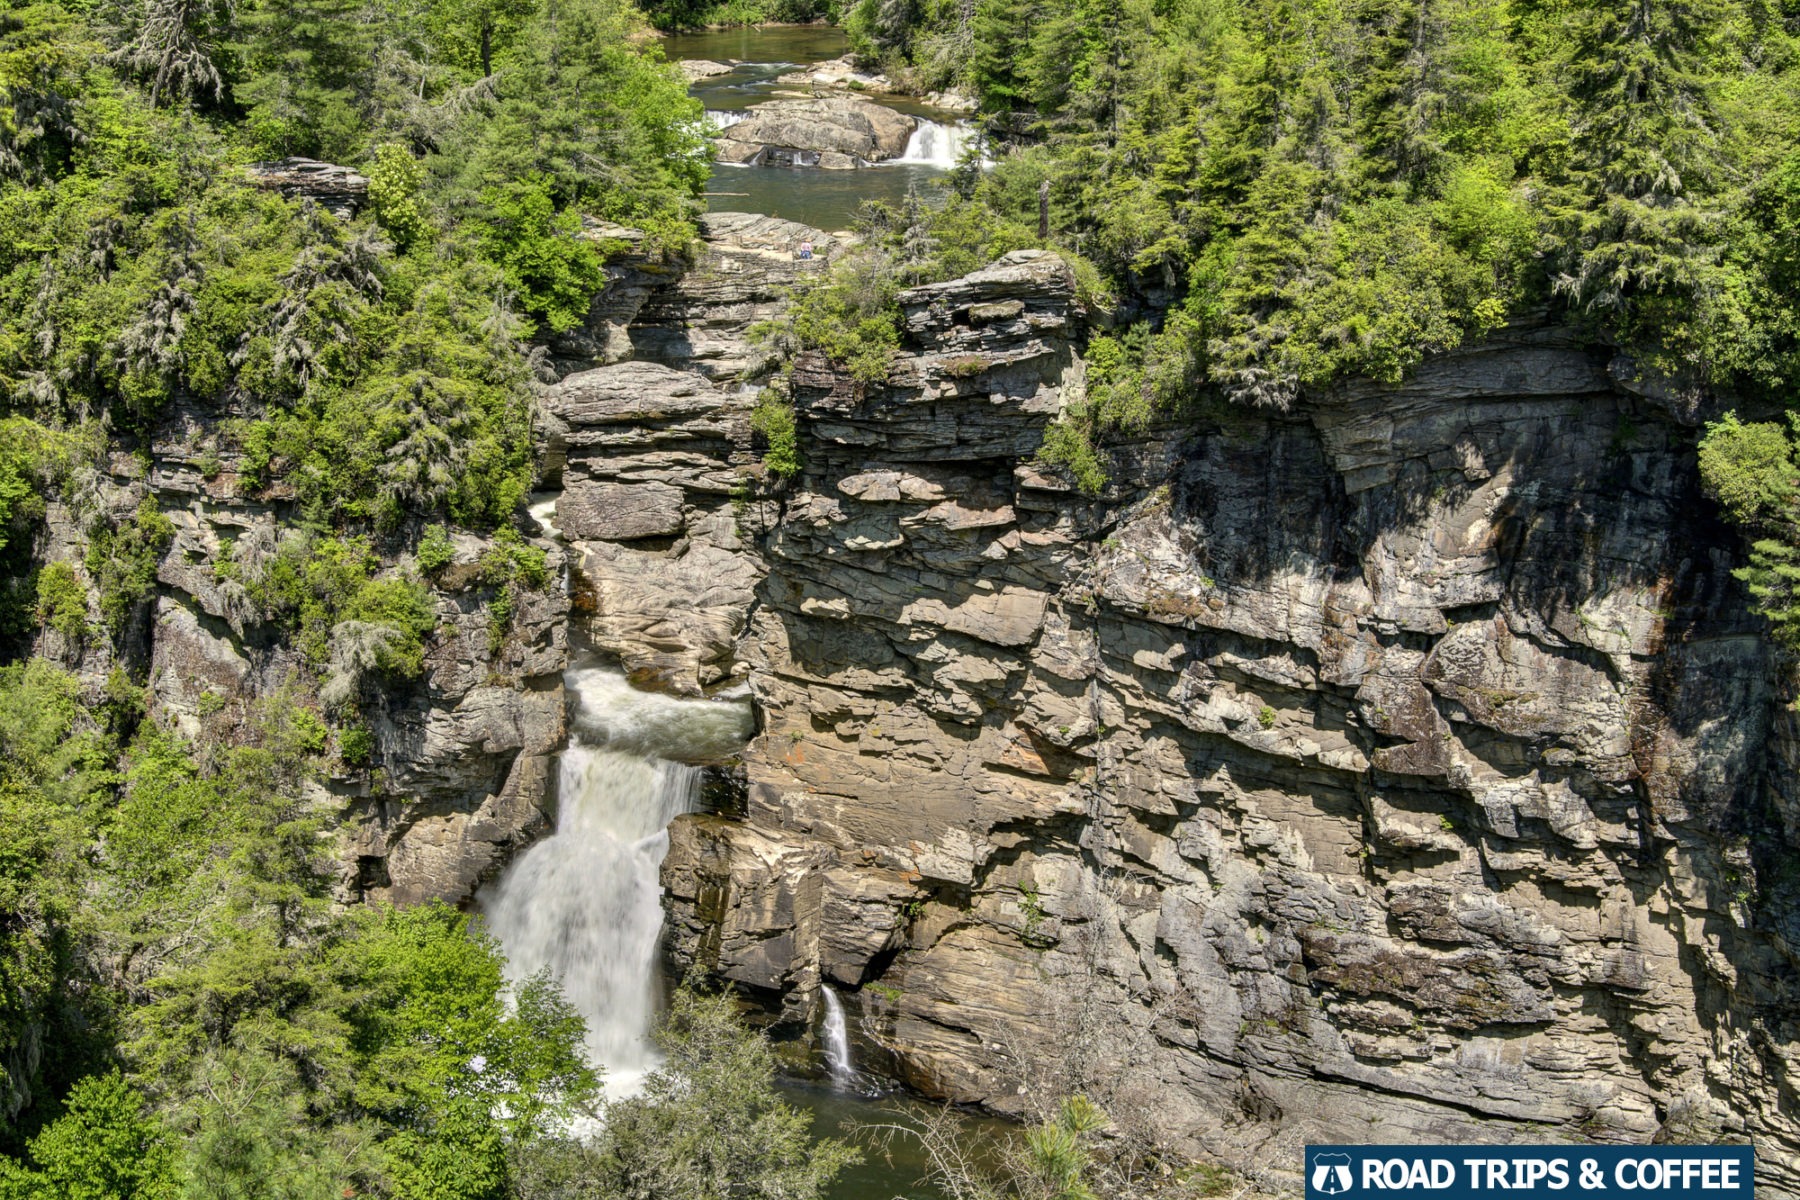 The towering Linville Falls spills over the edge into the ravine below on the Blue Ridge Parkway in North Carolina